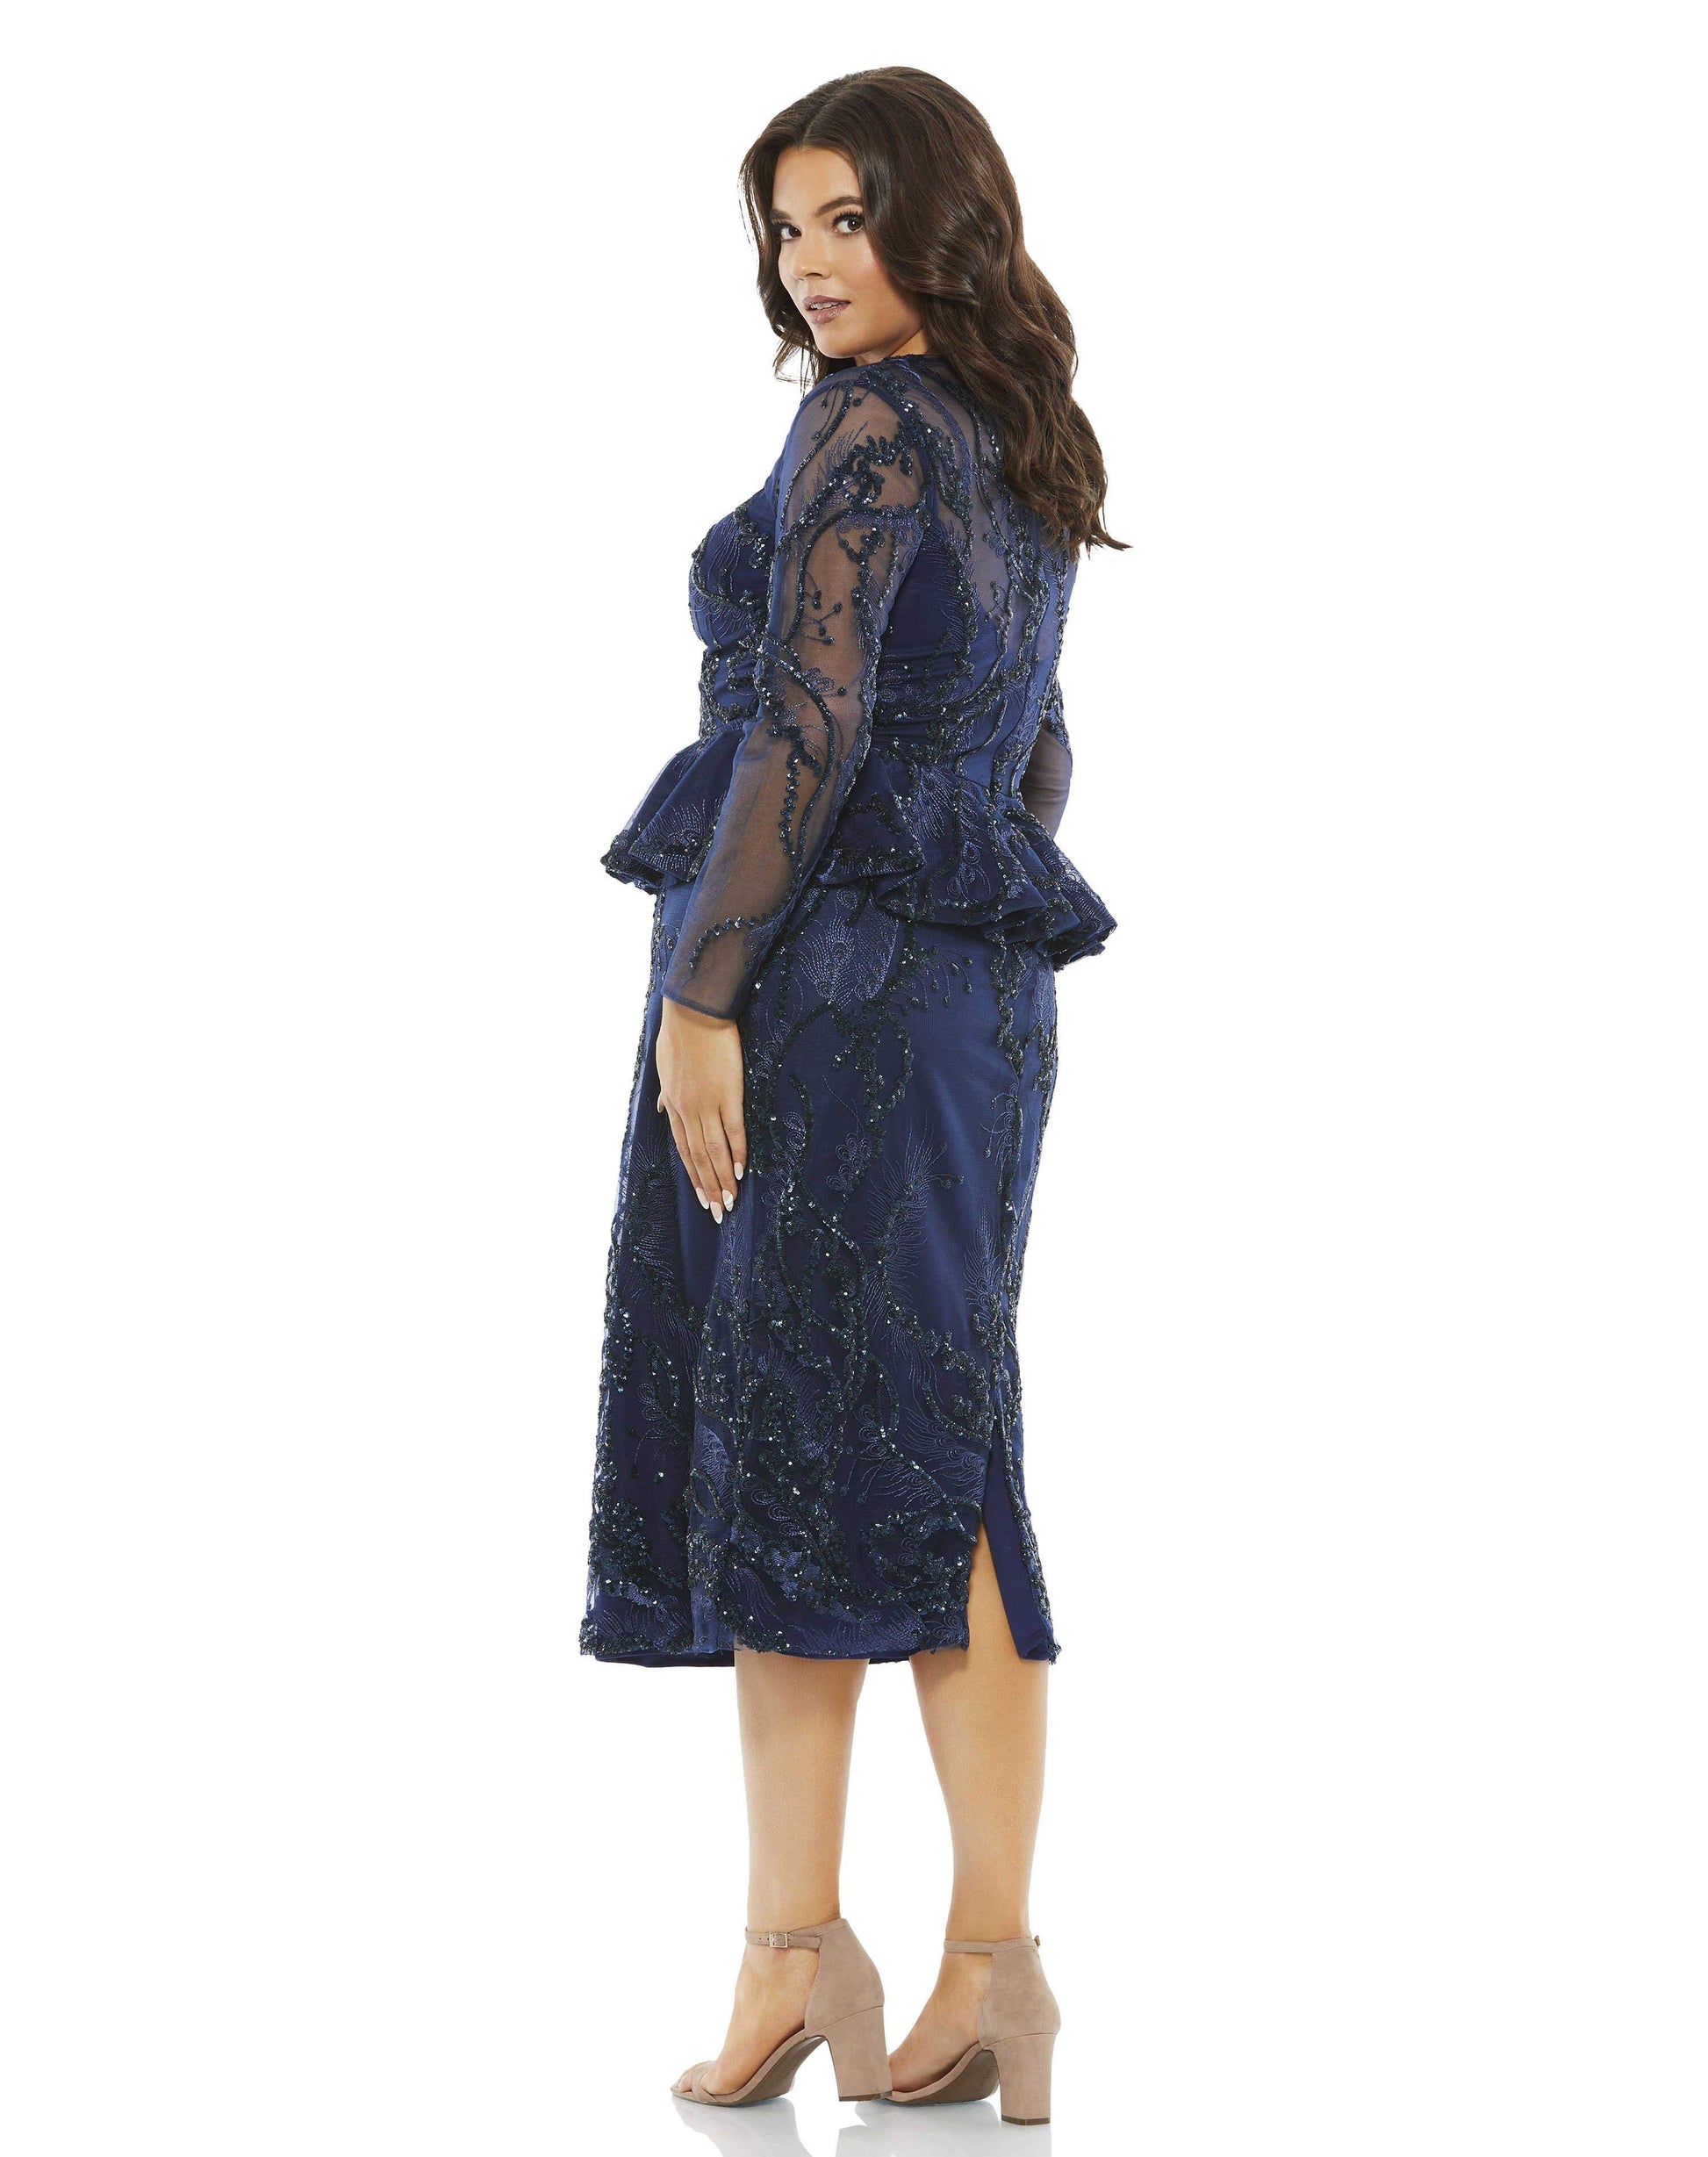 Make a grand entrance when you walk into a room wearing this dazzling dress detailed with streamers of sequins and color-matching embroidery. Lined with a deep V-neckline slip, the dress balances sexy sheerness and coverage with a peek-a-boo yoke, translu